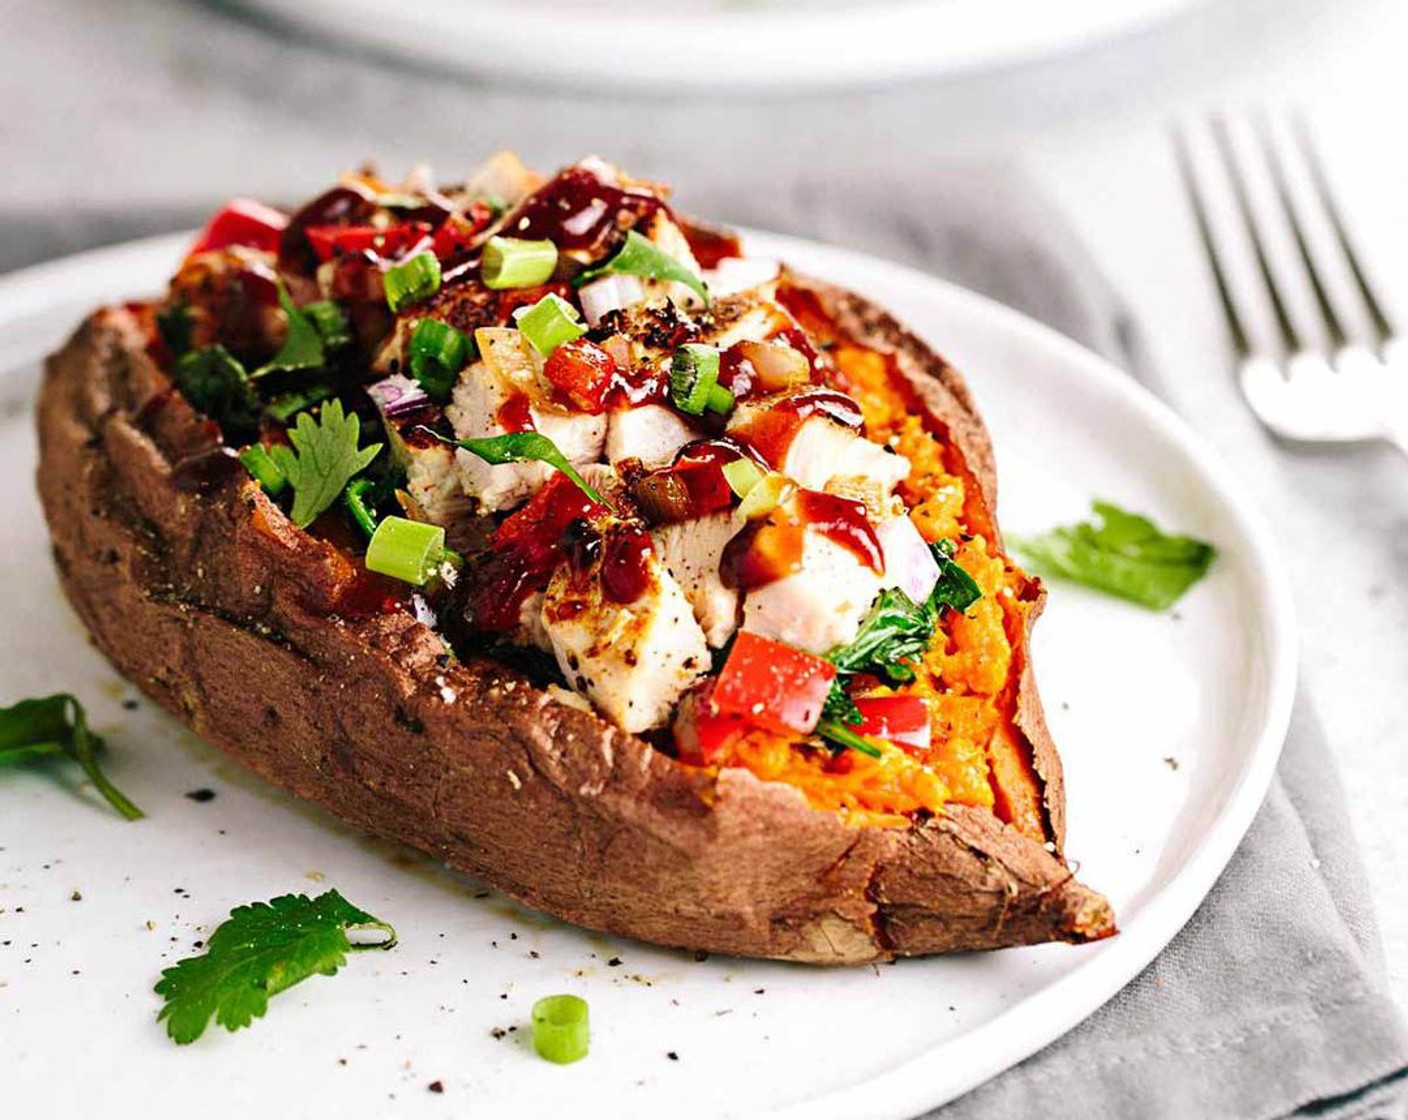 Stuffed Sweet Potato with Barbecue Chicken